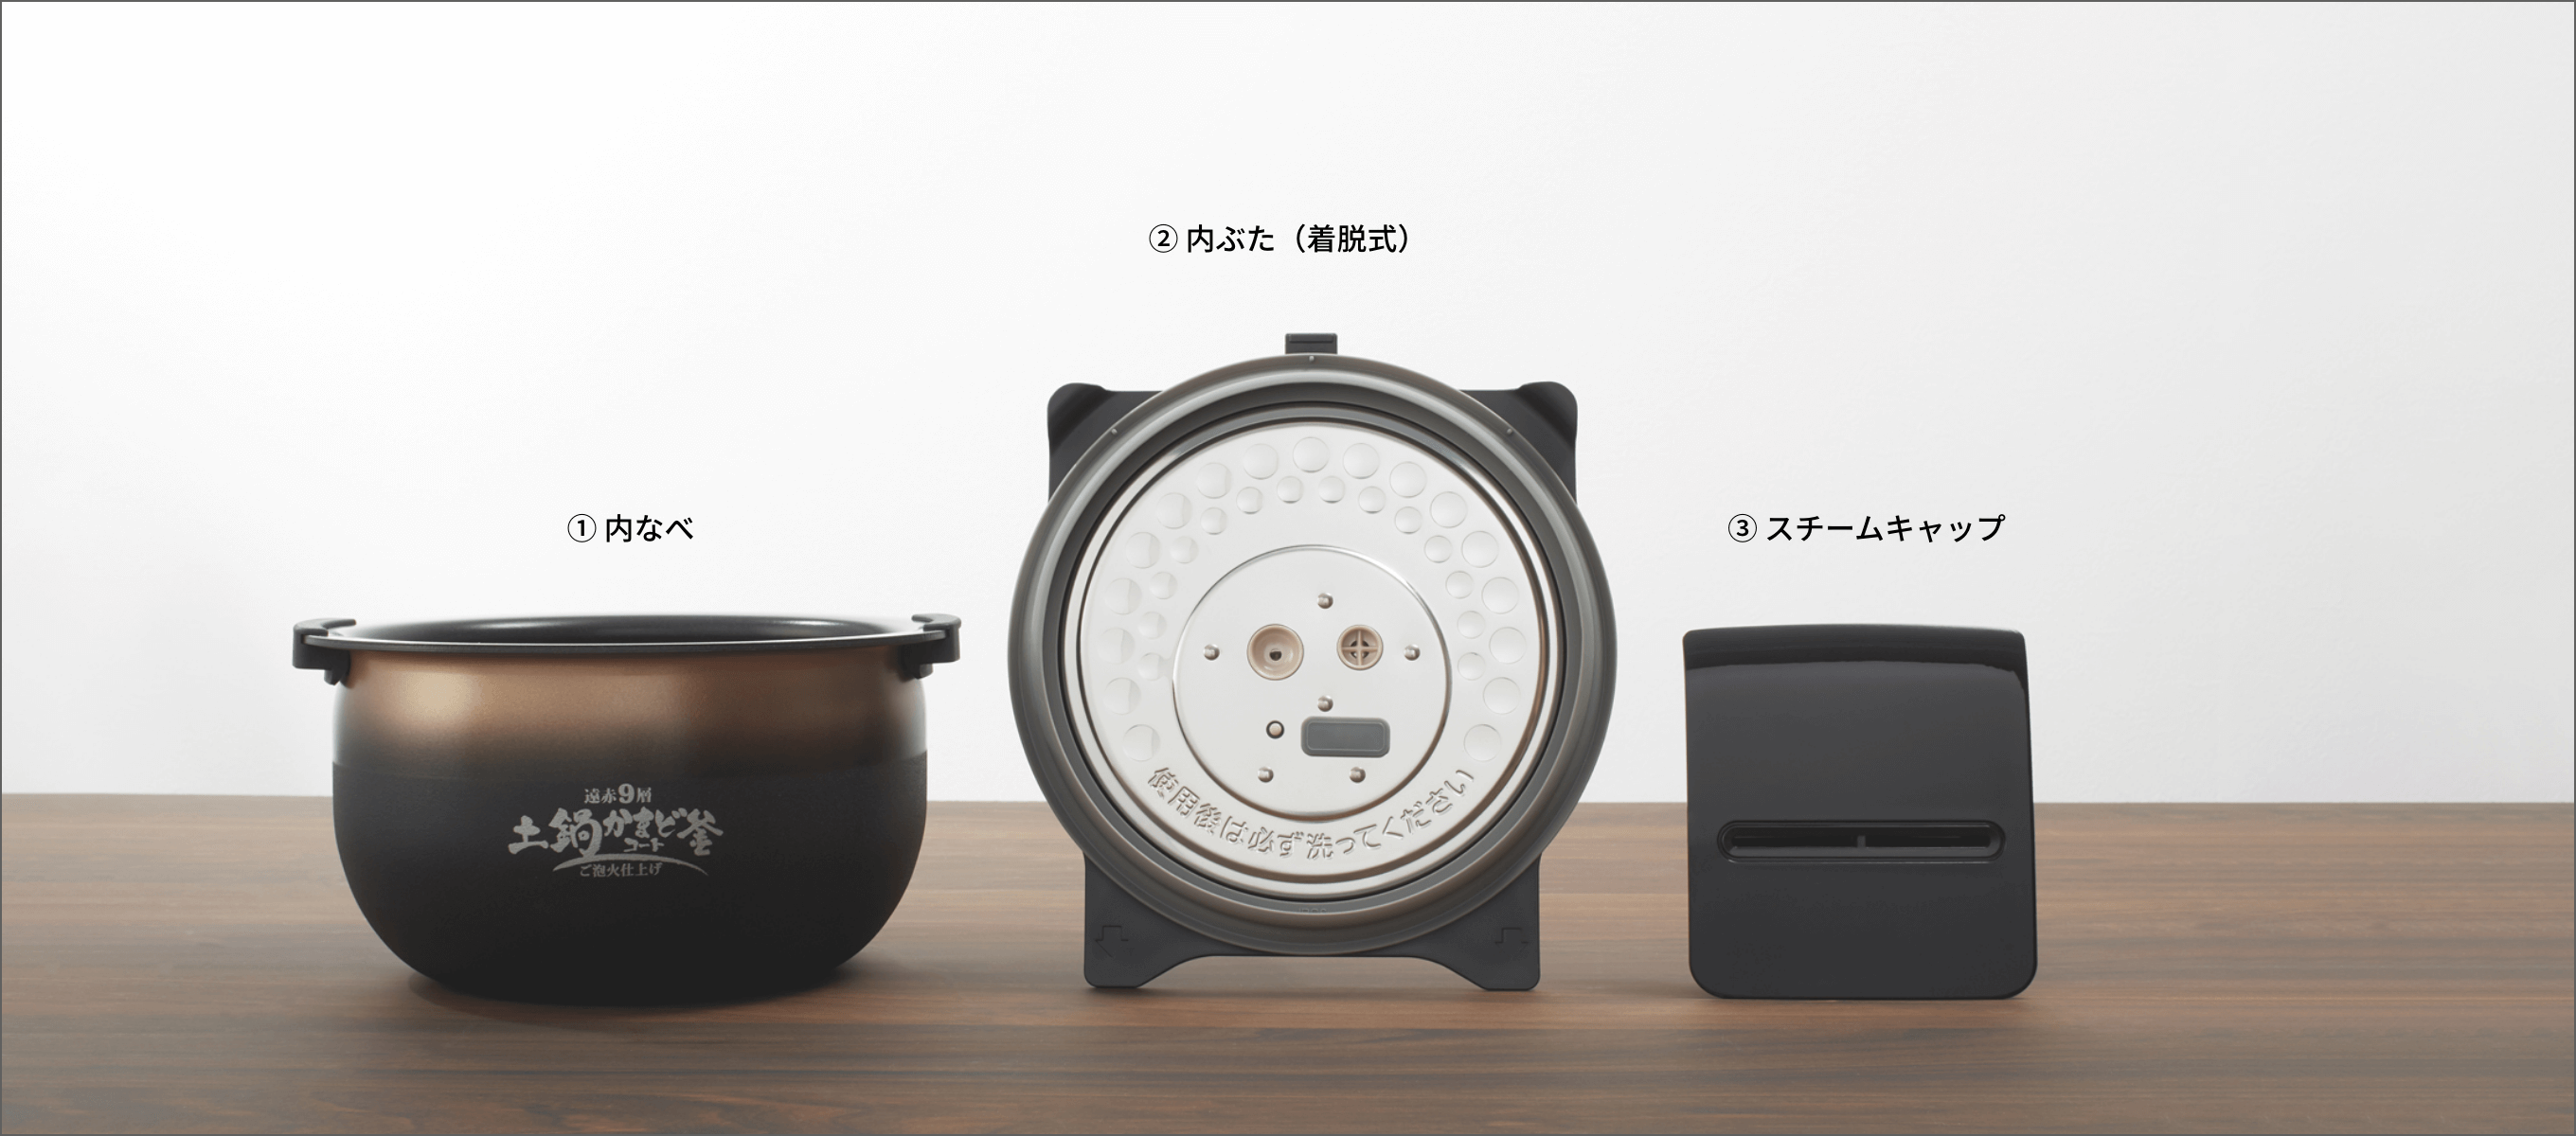 https://www.tiger-corporation.com/contents/product/rice-cooker/jpi-x/assets/img/img_sec07_01.png